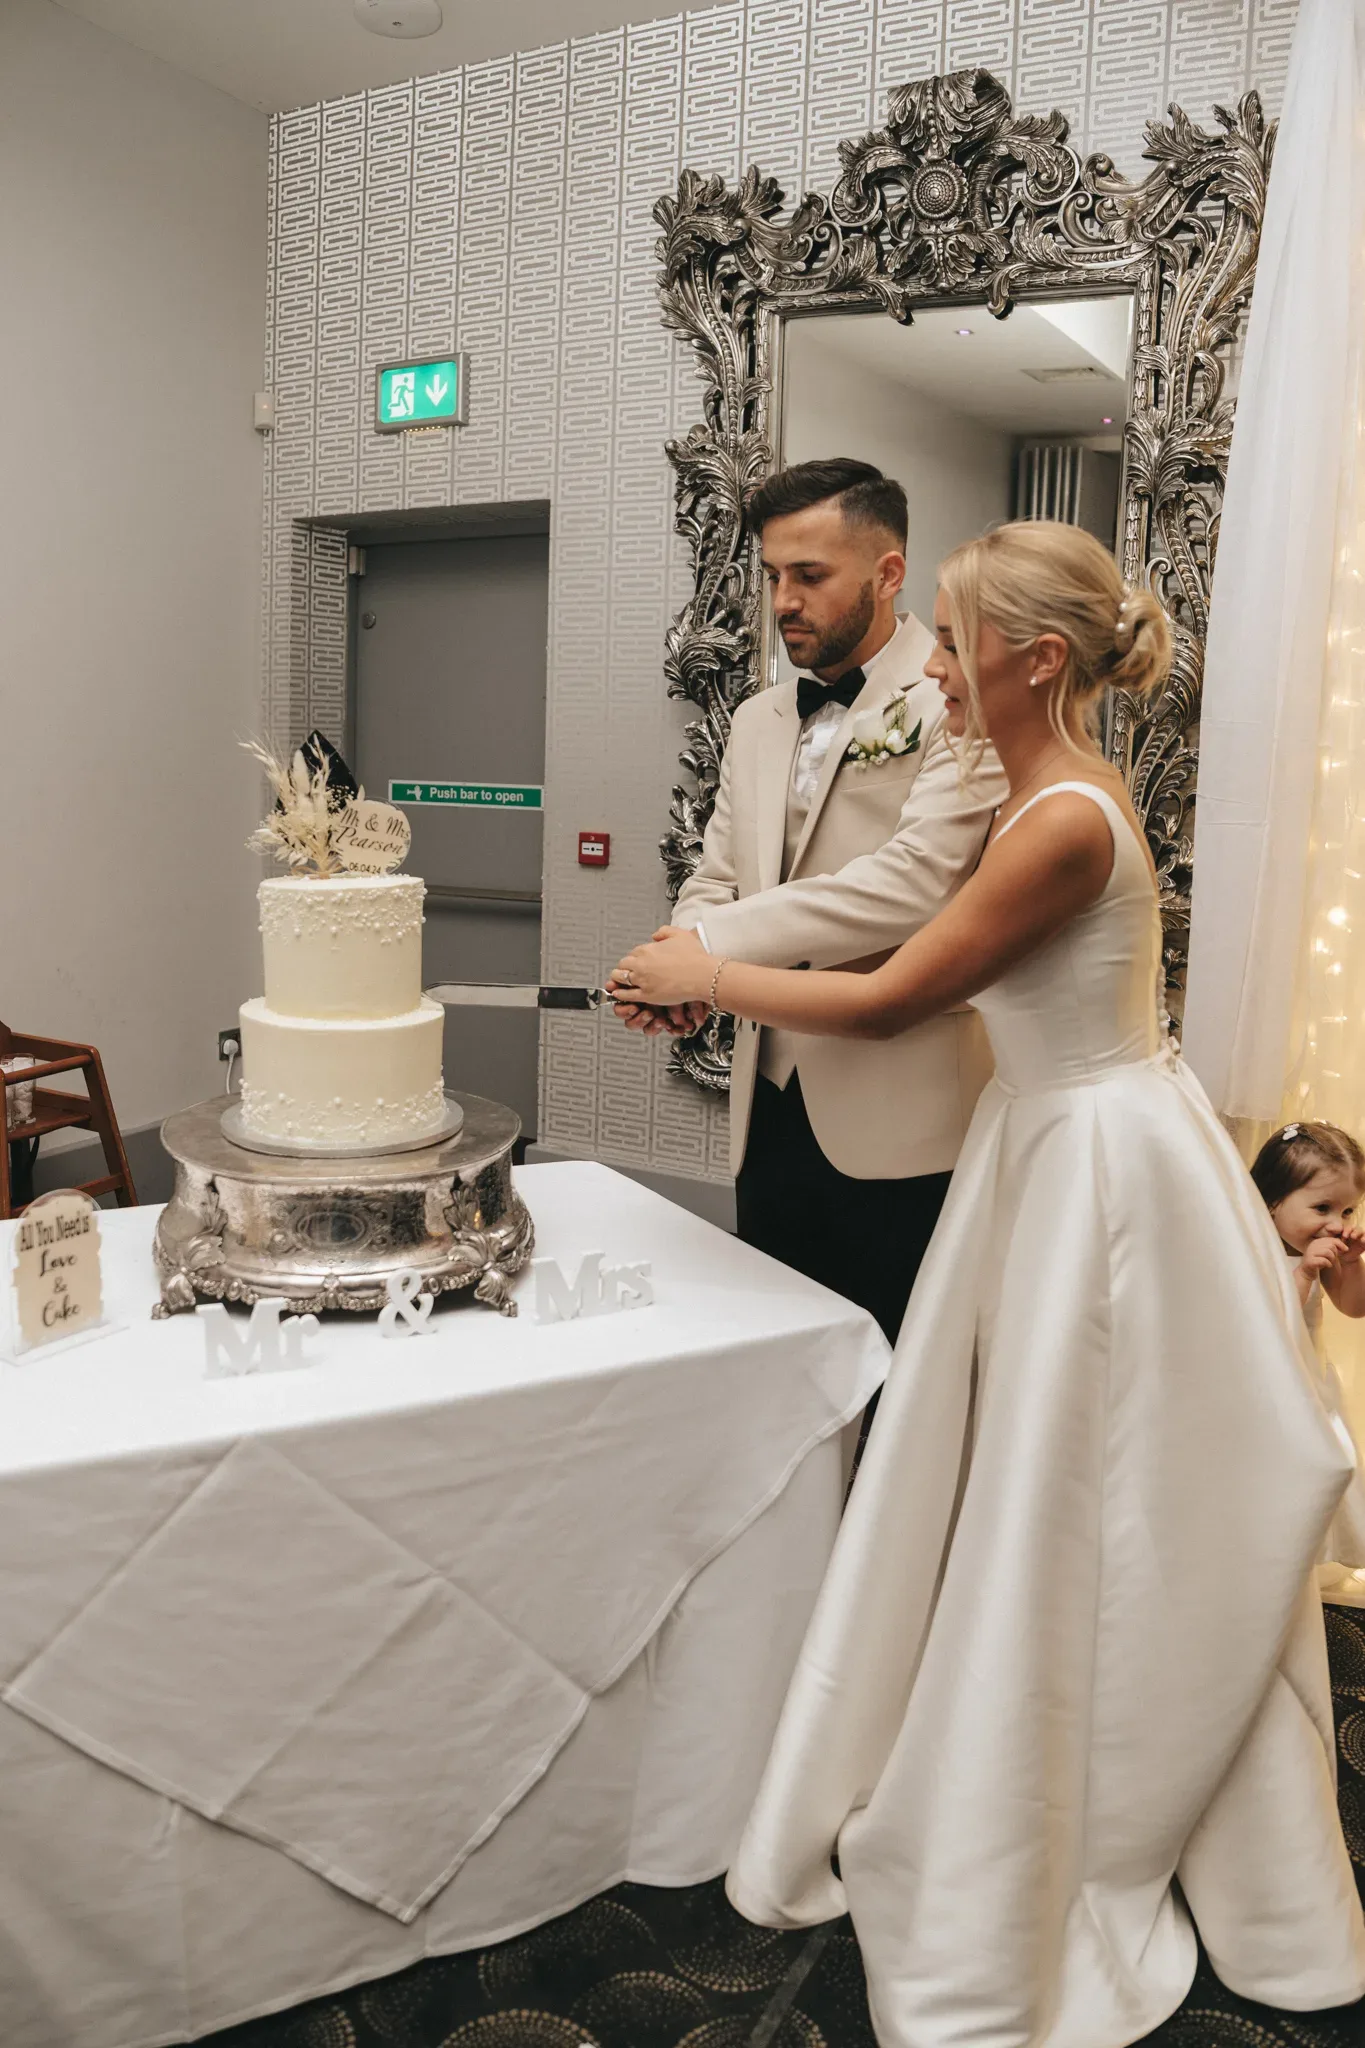 A bride and groom are cutting their wedding cake together in a decorated room. there is an ornate silver frame in the background and a child peeking out from behind the table on the right.